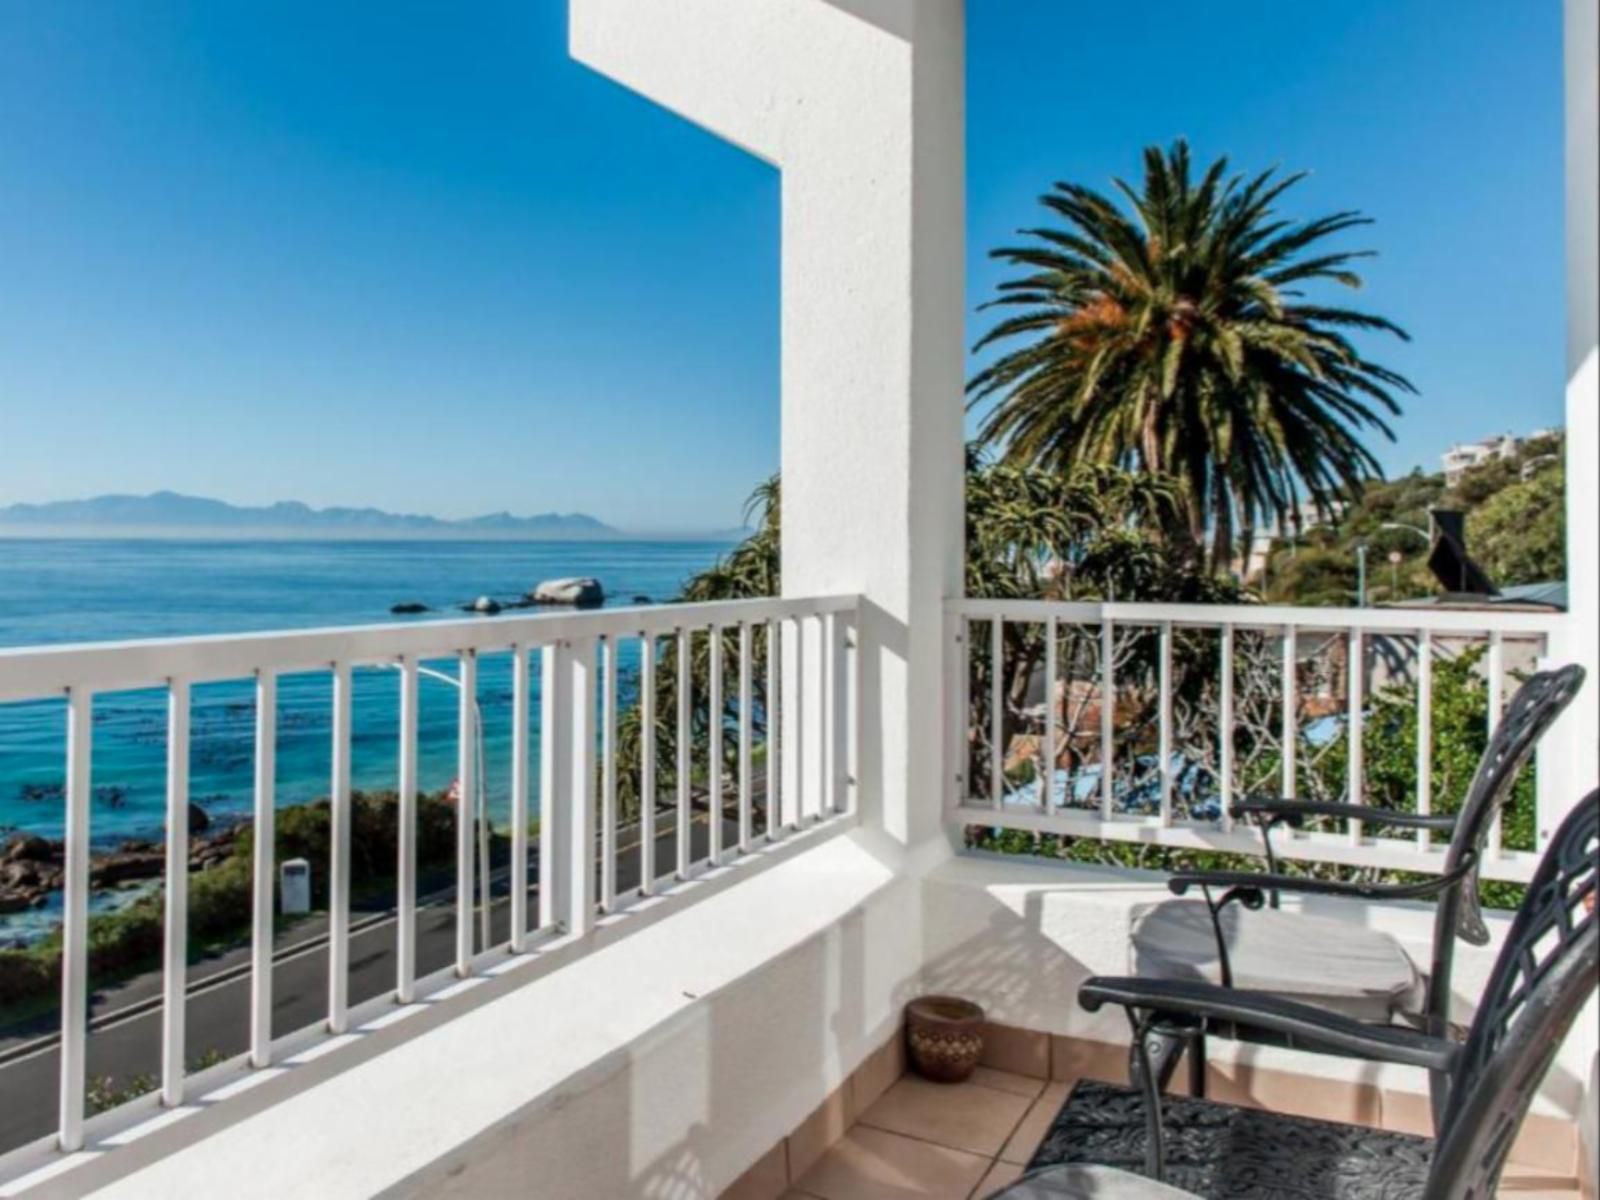 Whale View Manor Boutique Hotel And Spa Simons Town Cape Town Western Cape South Africa Balcony, Architecture, Beach, Nature, Sand, Palm Tree, Plant, Wood, Framing